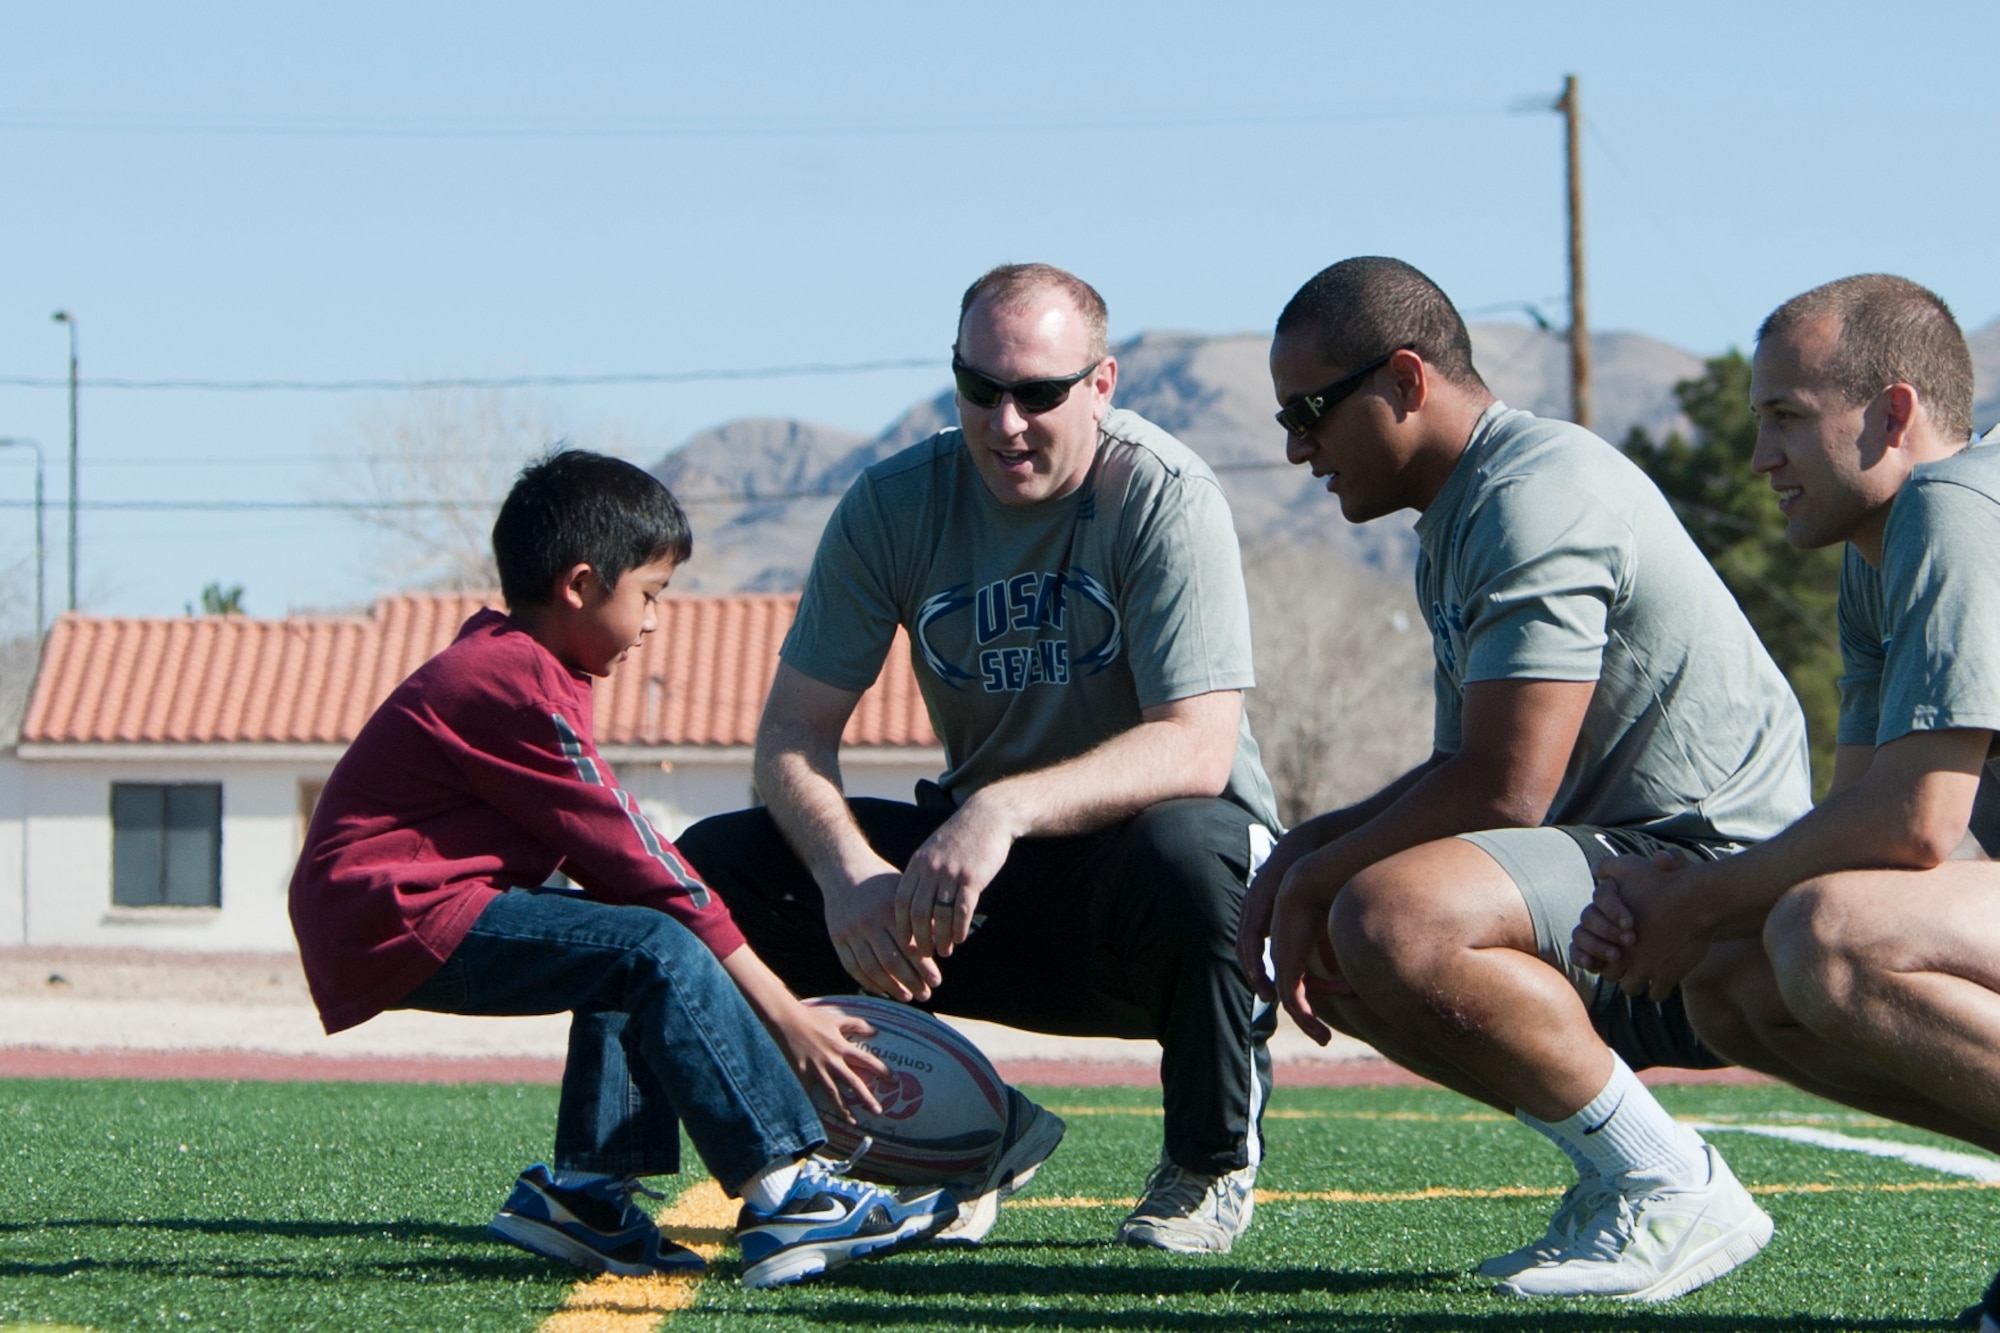 A Lomie Heard Elementary School student practices sprinting drills as Air Force Rugby Sevens players look on during a children's rugby clinic Feb. 6, 2013, at Nellis Air Force Base, Nev.  Armed forces Rugby Sevens teams from all four branches of service are participating in the largest amateur rugby tournament in Las Vegas. (U.S. Air Force photo by Lawrence Crespo)